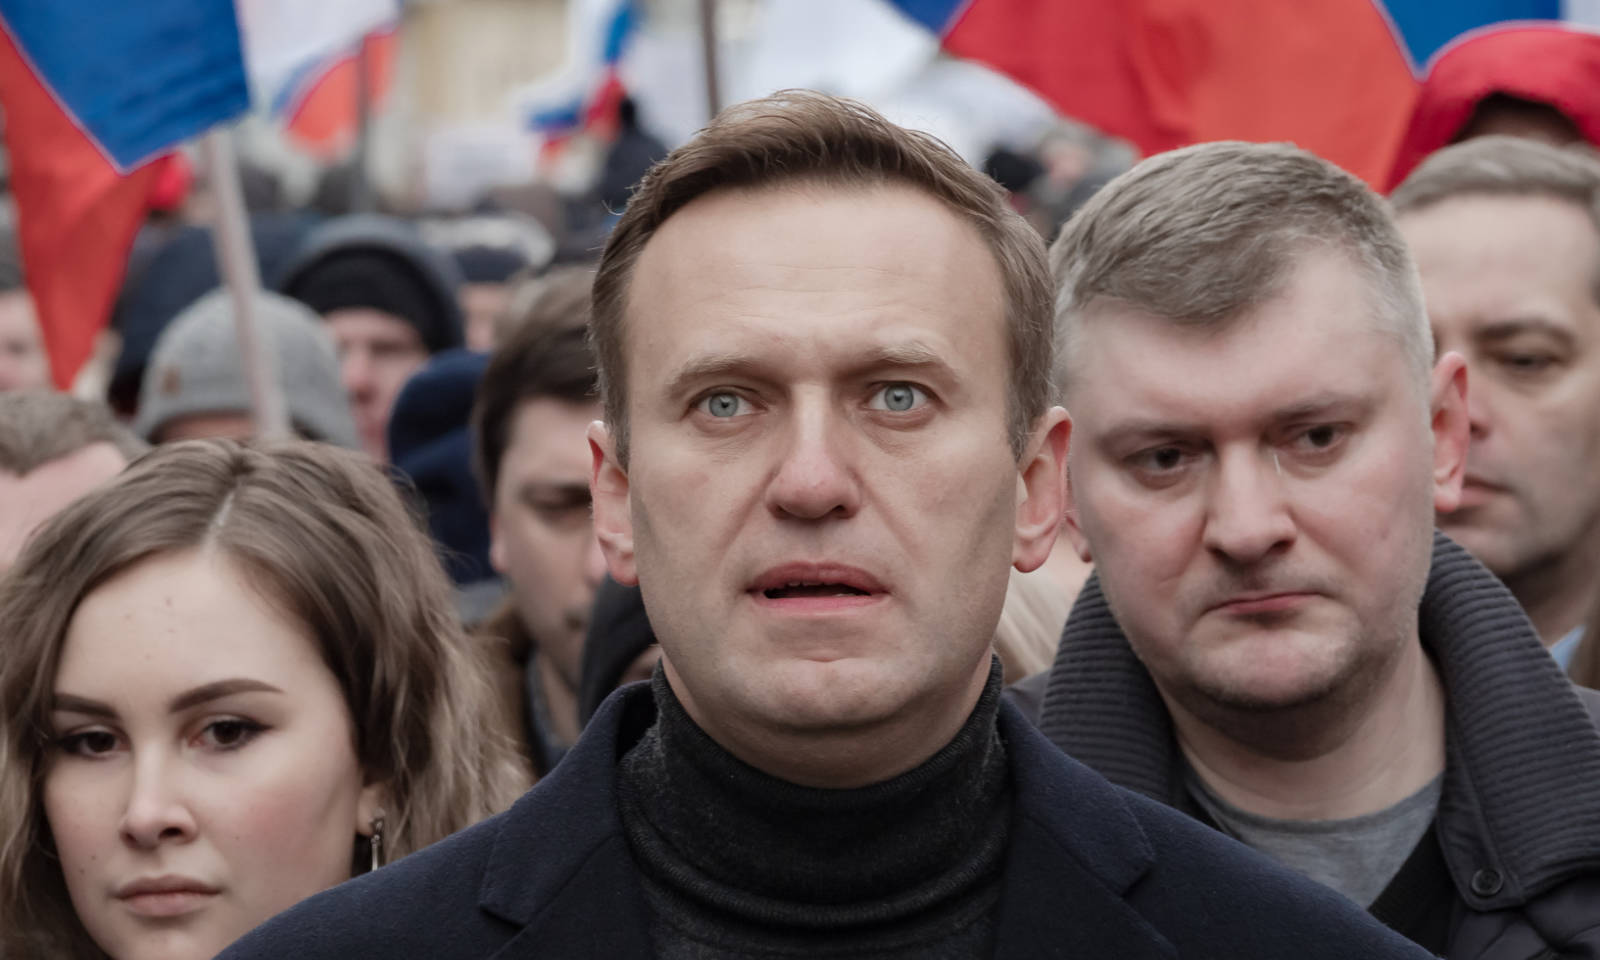 Alexei Navalny staring ahead with a crowd of people behind him holding Russian flags.